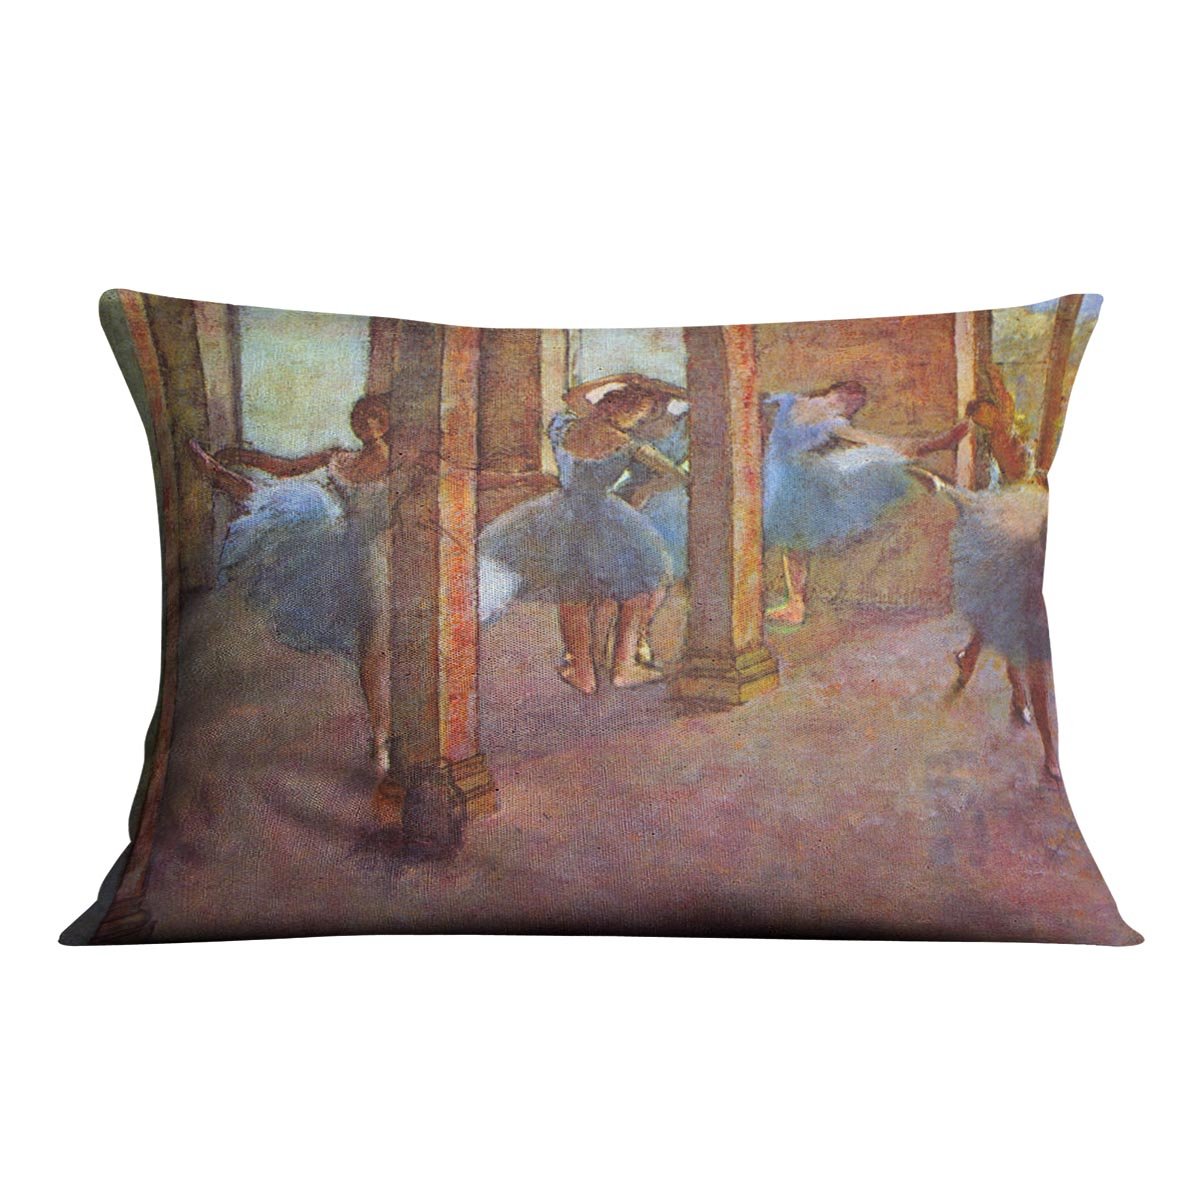 Dancers in the Foyer by Degas Cushion